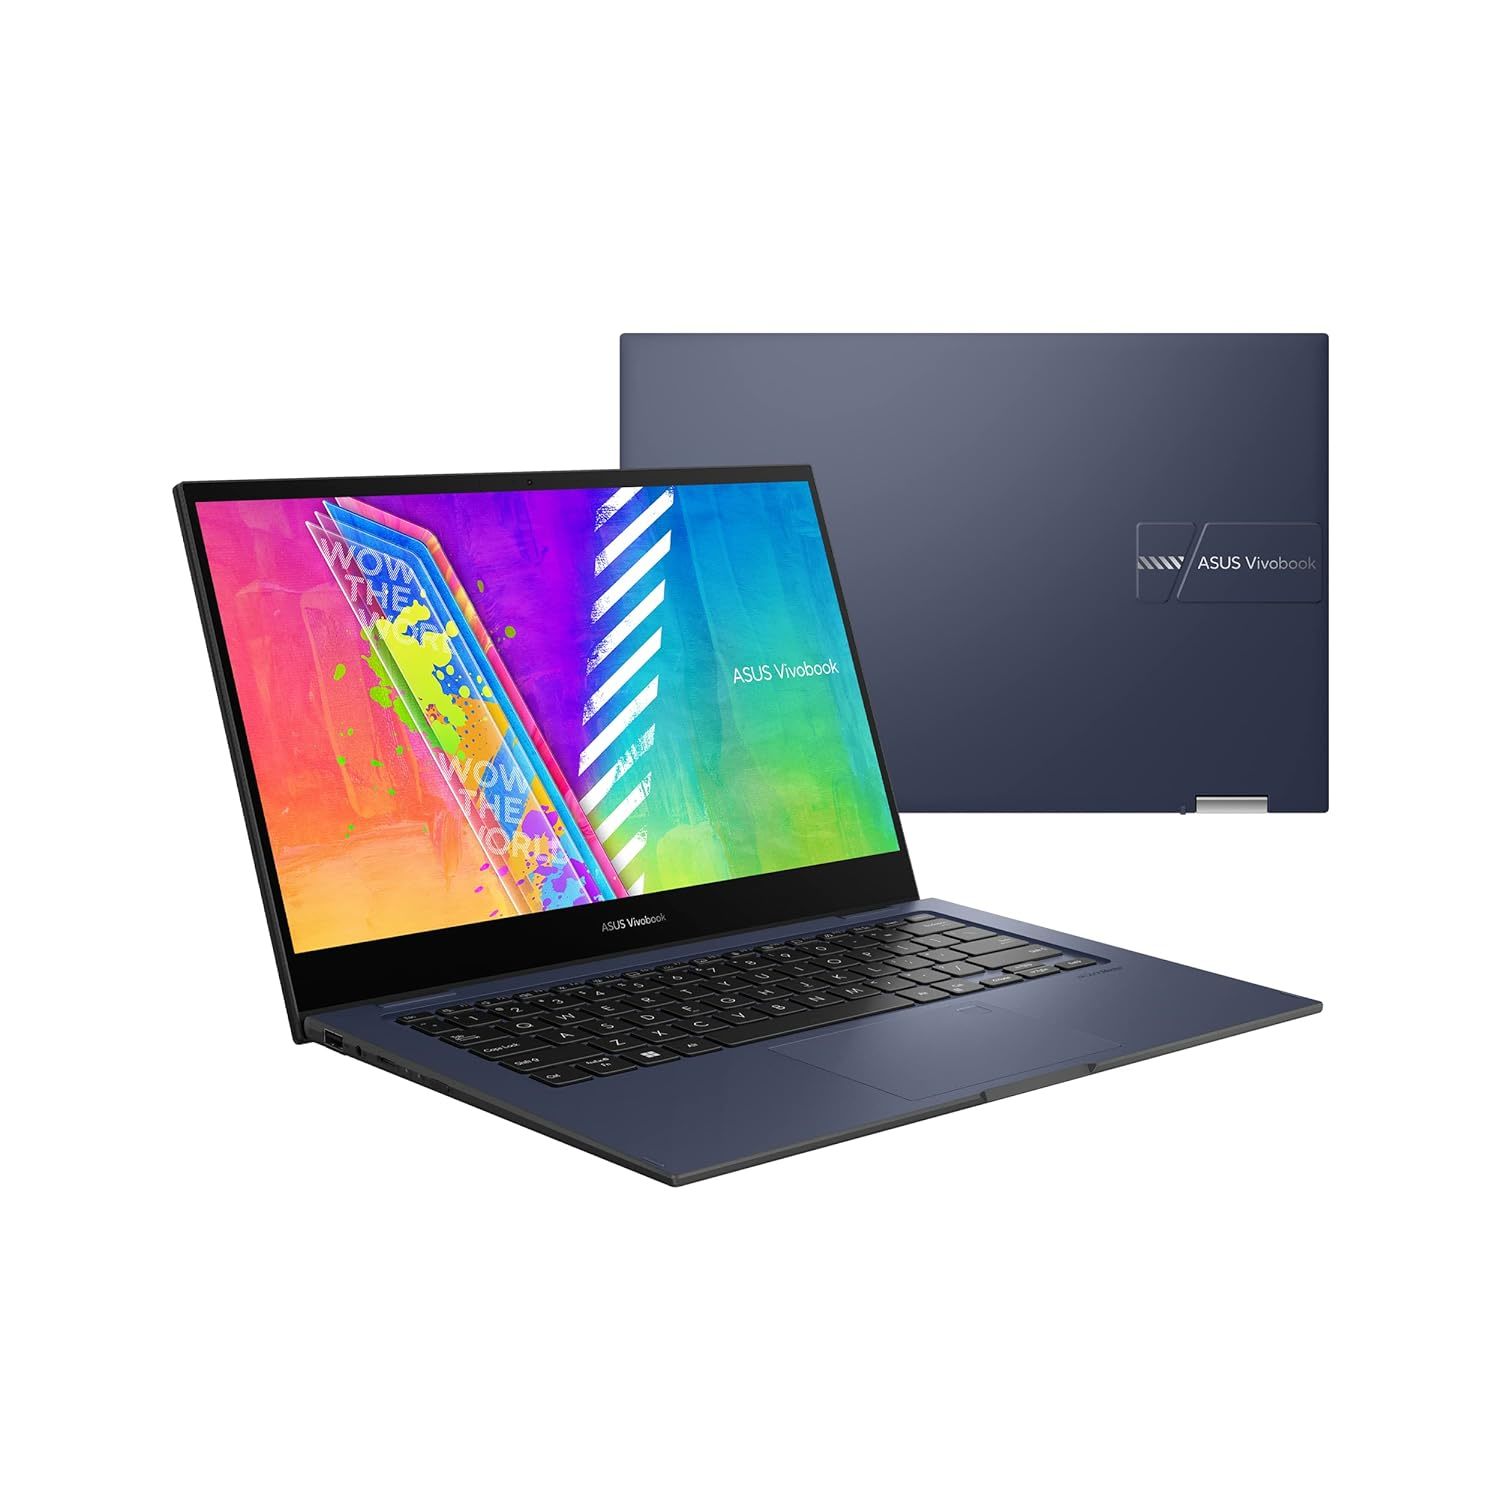 Primary image for ASUS VivoBook Go 14 Flip Thin and Light 2-in-1 Laptop, 14 inch HD Touch, Intel C